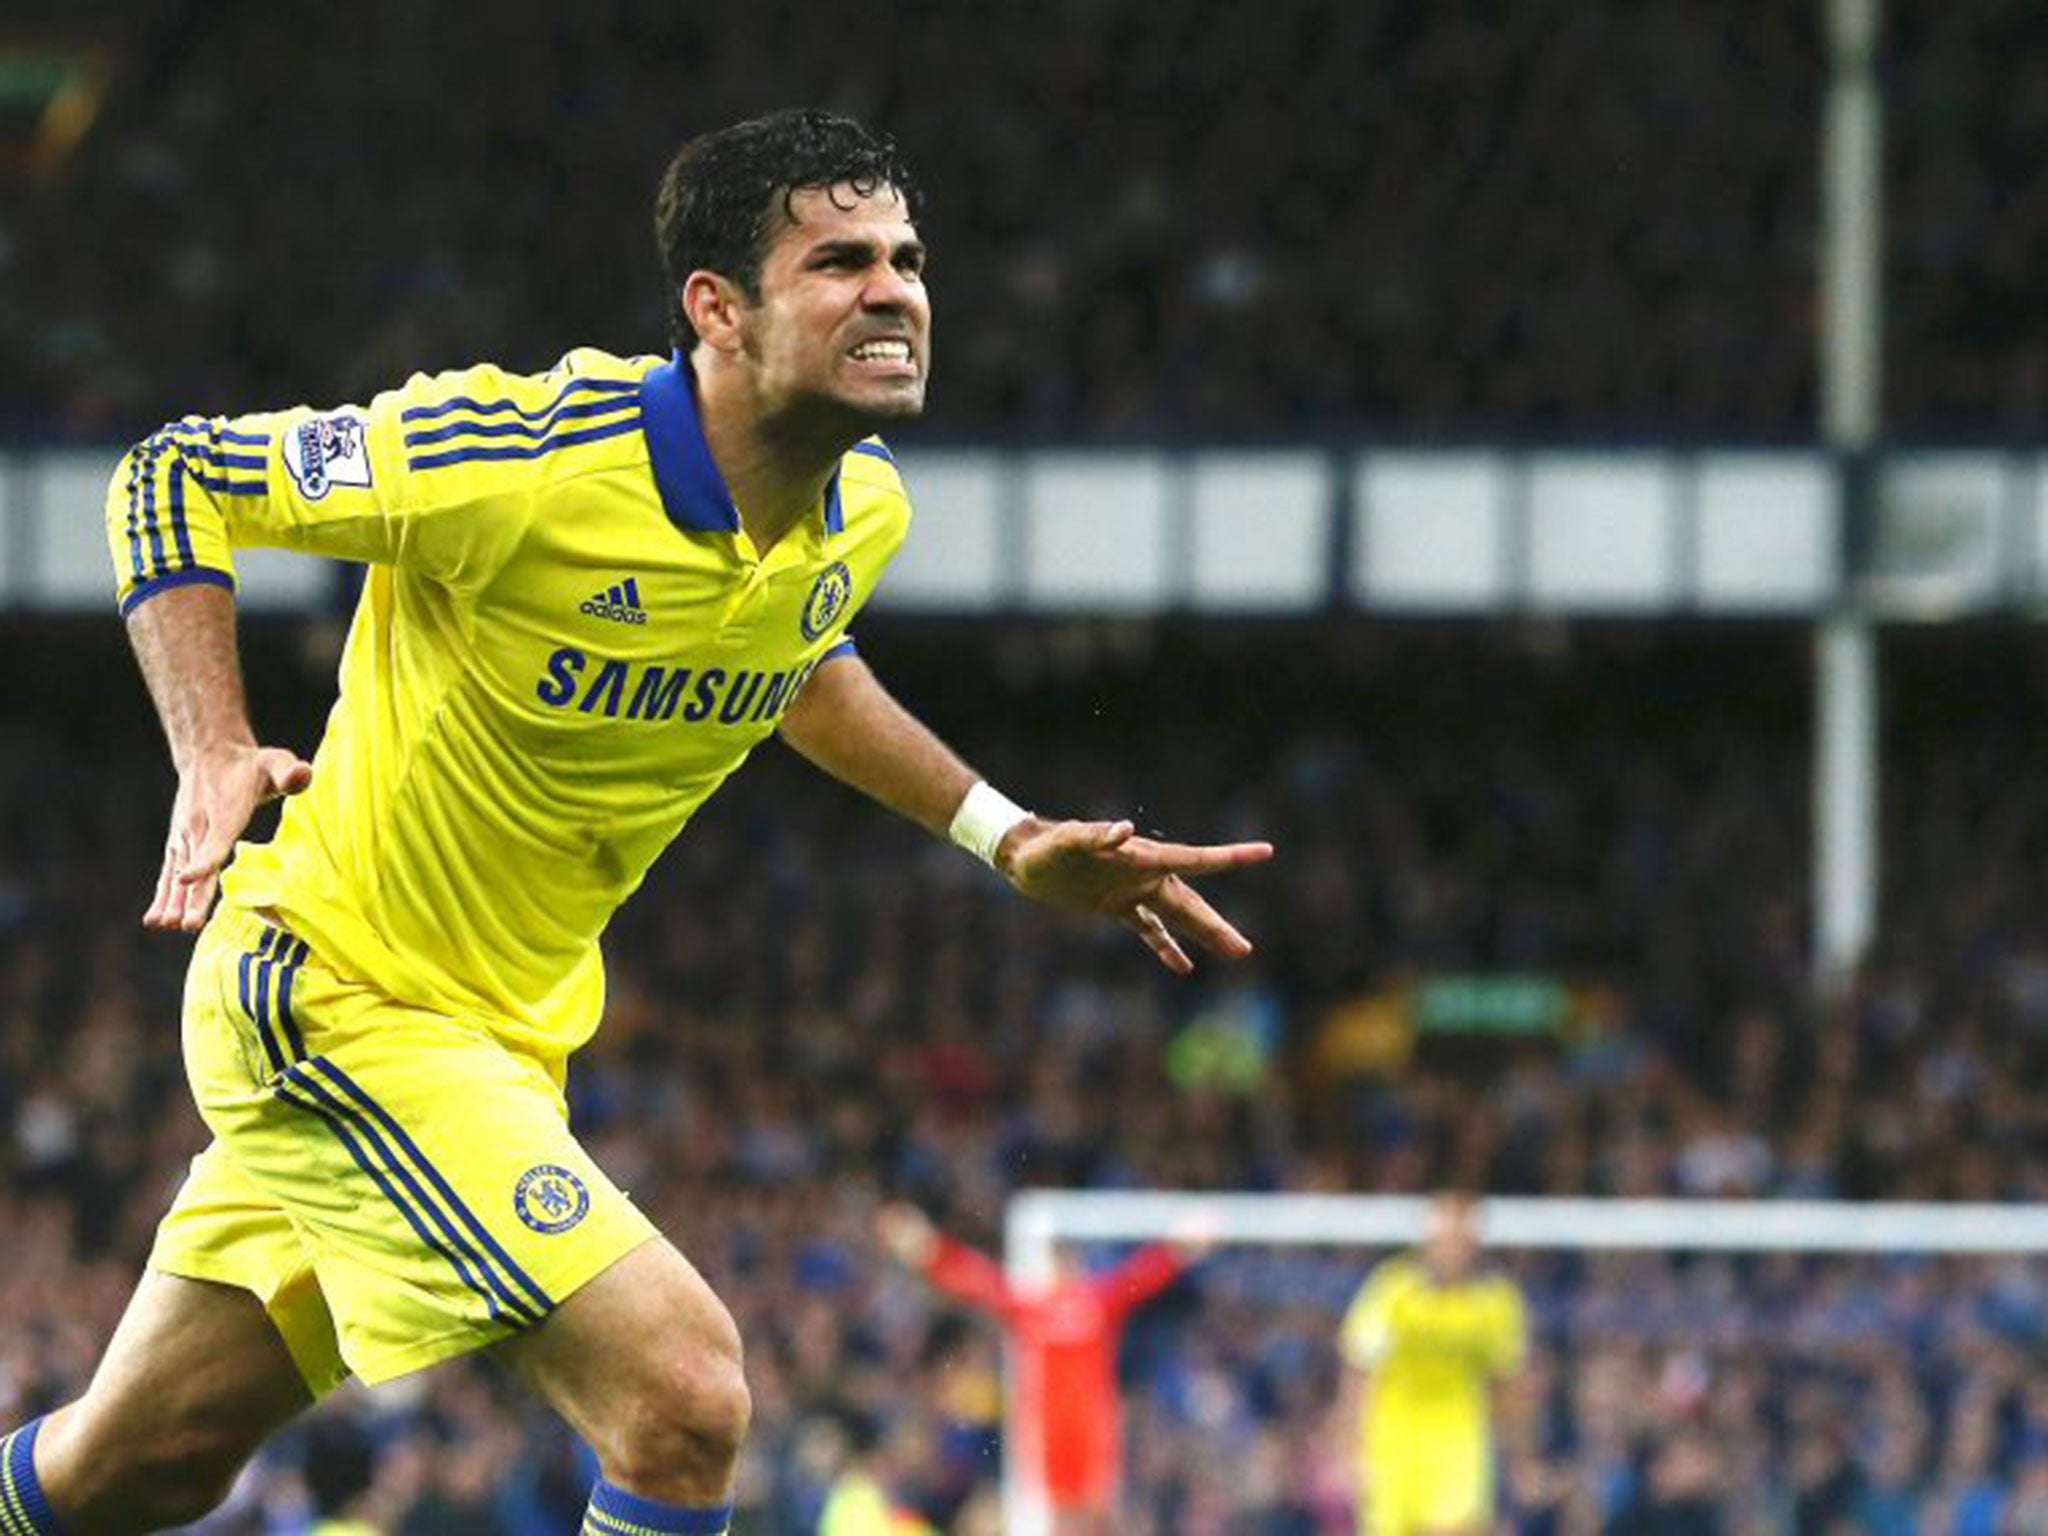 Costa joined Chelsea from Atletico Madrid for £32m in the summer